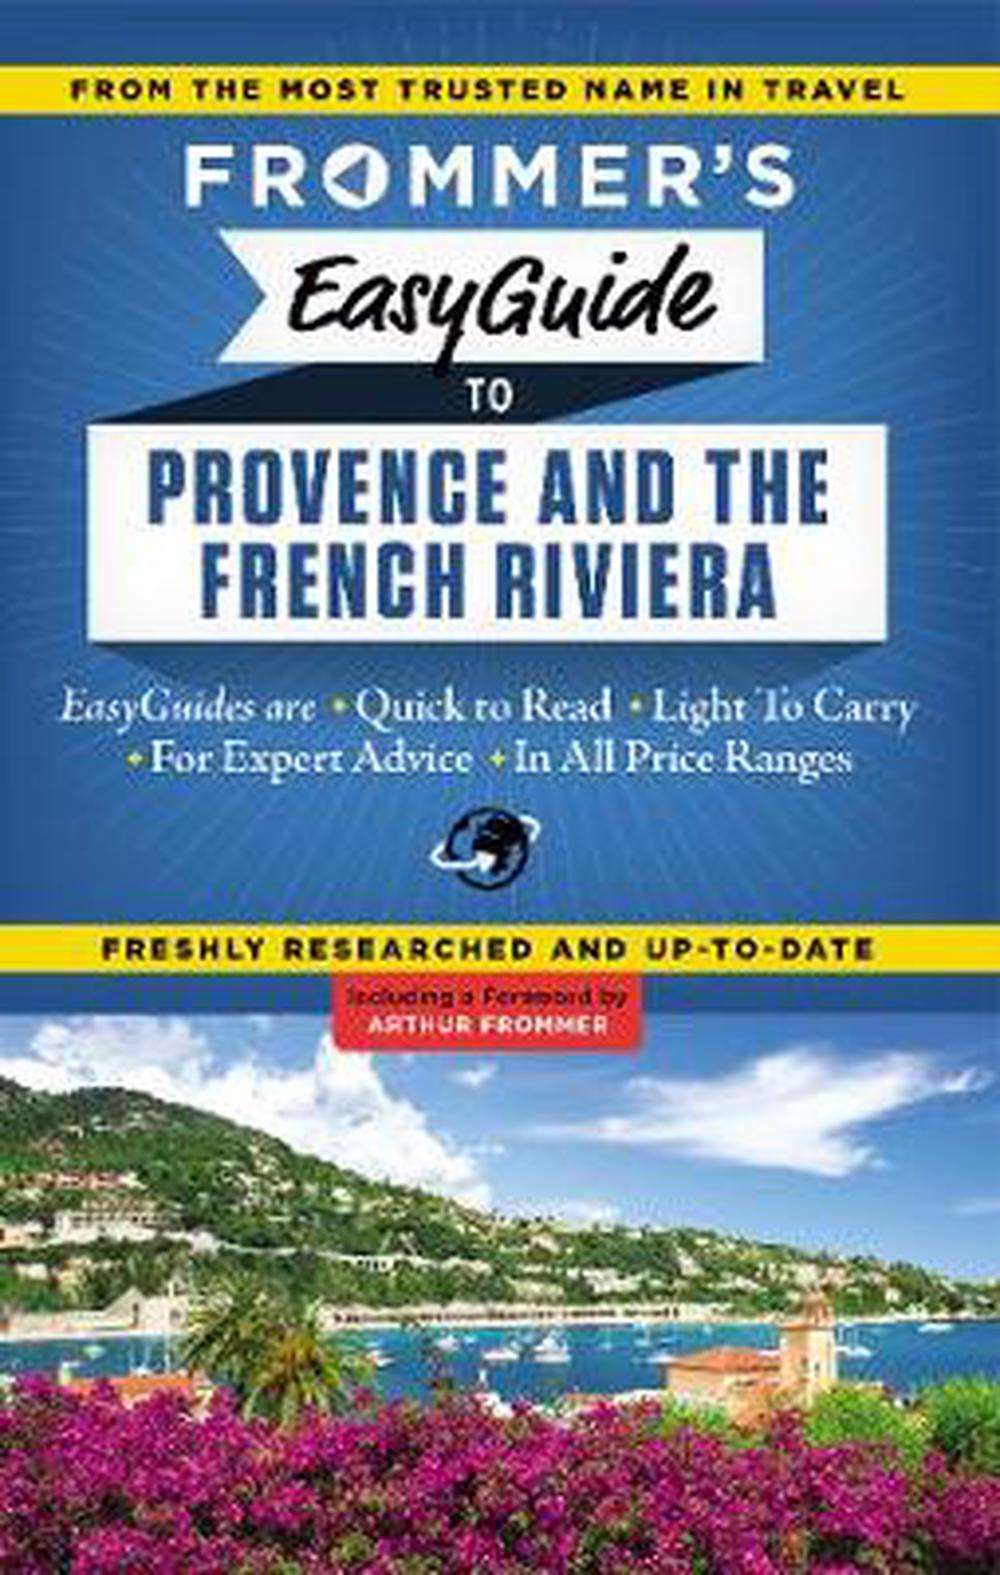 Frommer's Easyguide to Provence and the French Riviera by Tristan